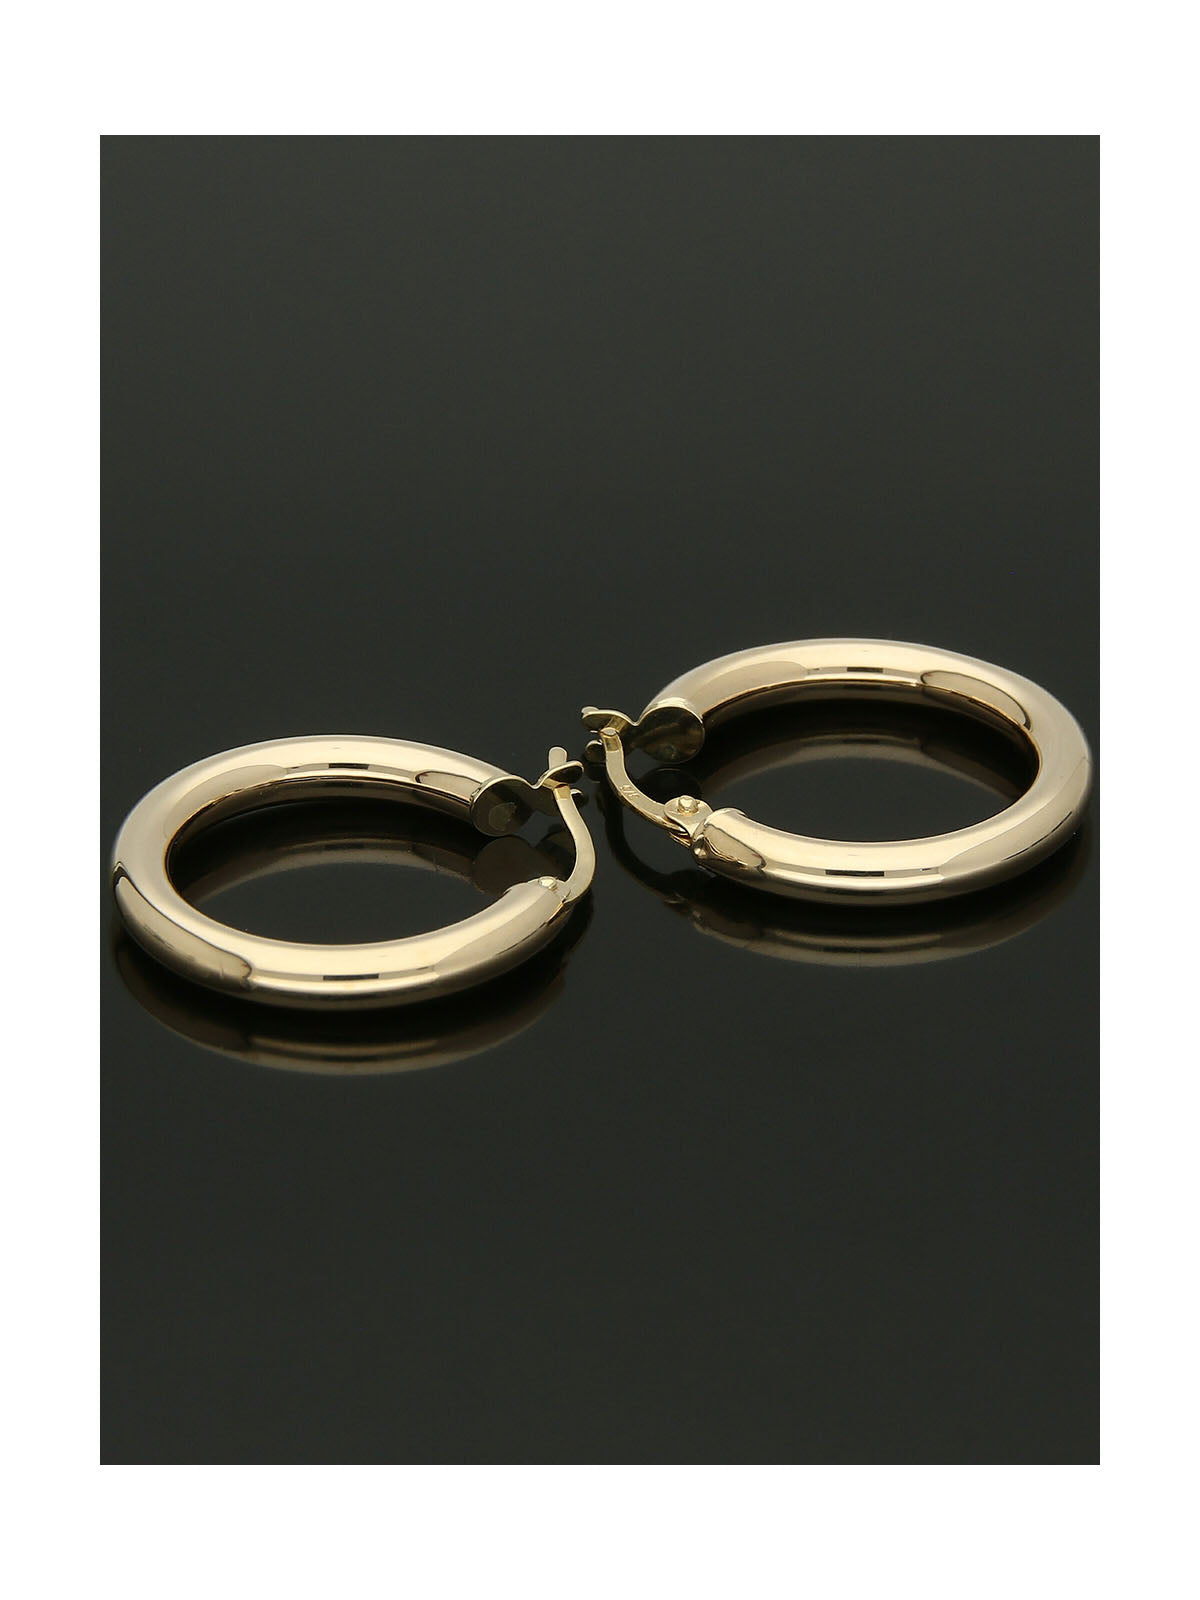 Polished Hoop Earrings 15mm in 9ct Yellow Gold